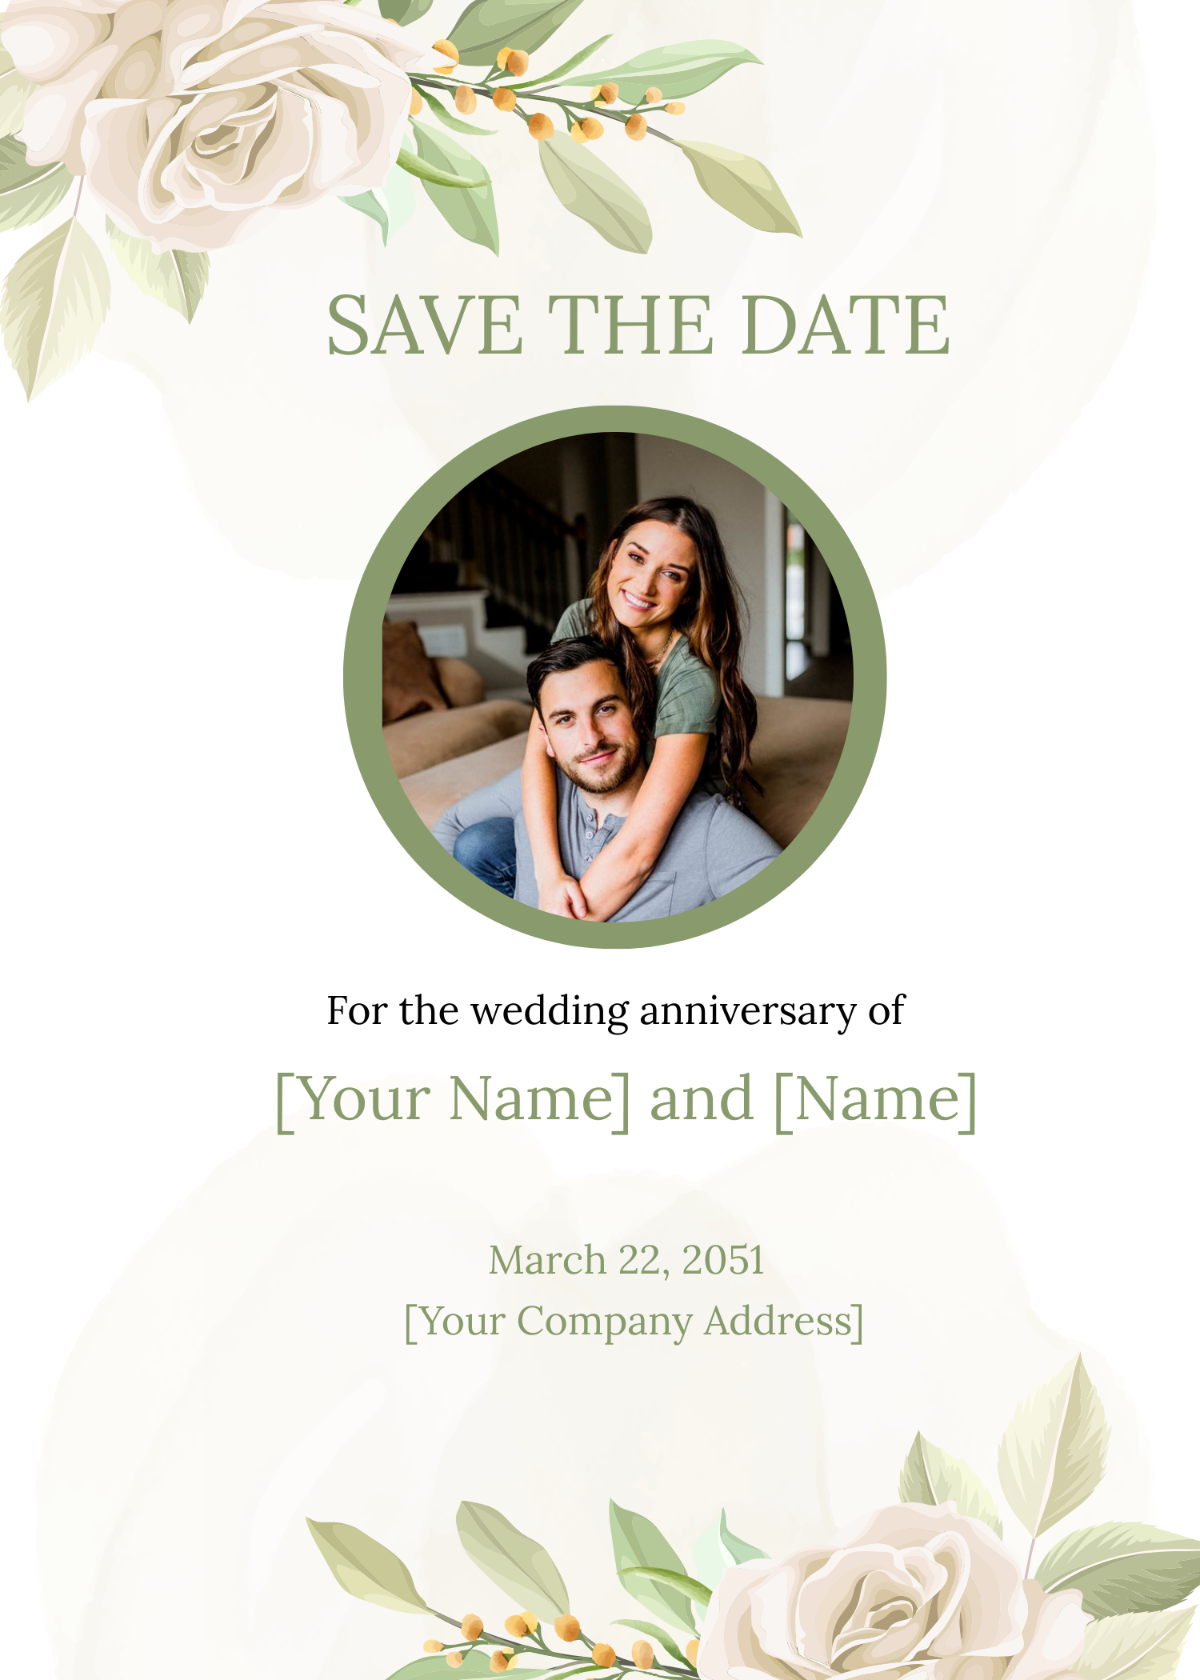 Save the Date Digital  Cards